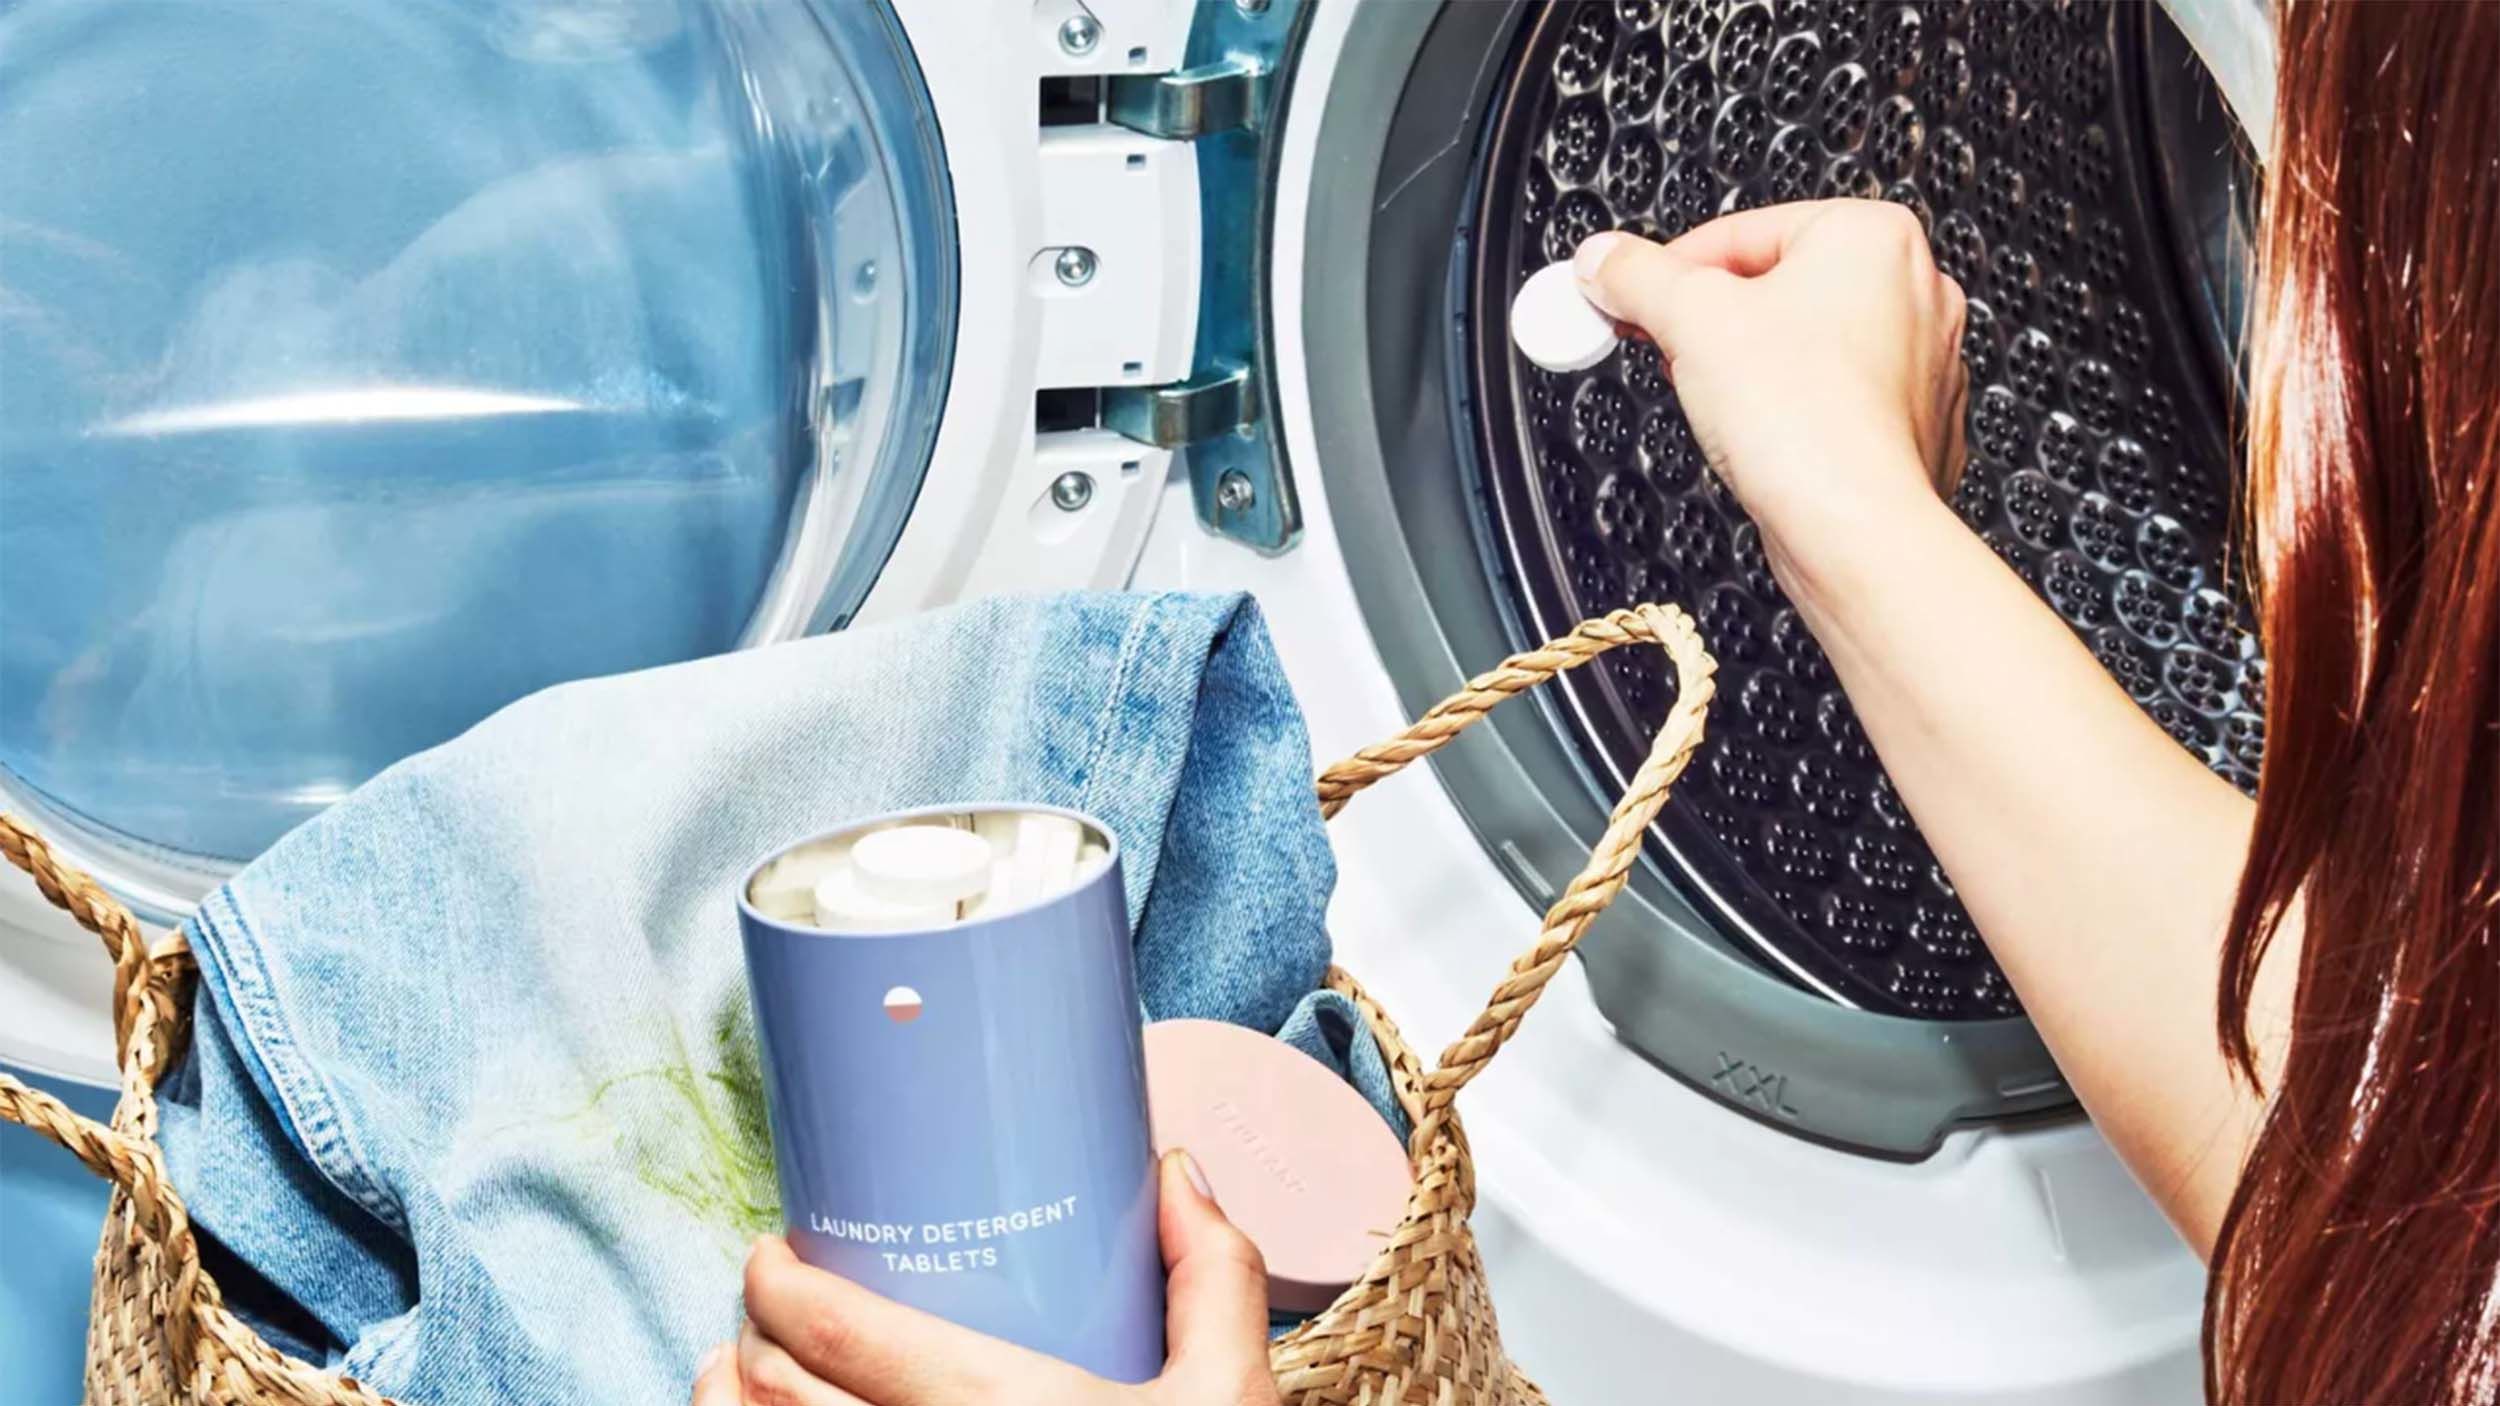 Our trusted guide on how to wash laundry sustainably